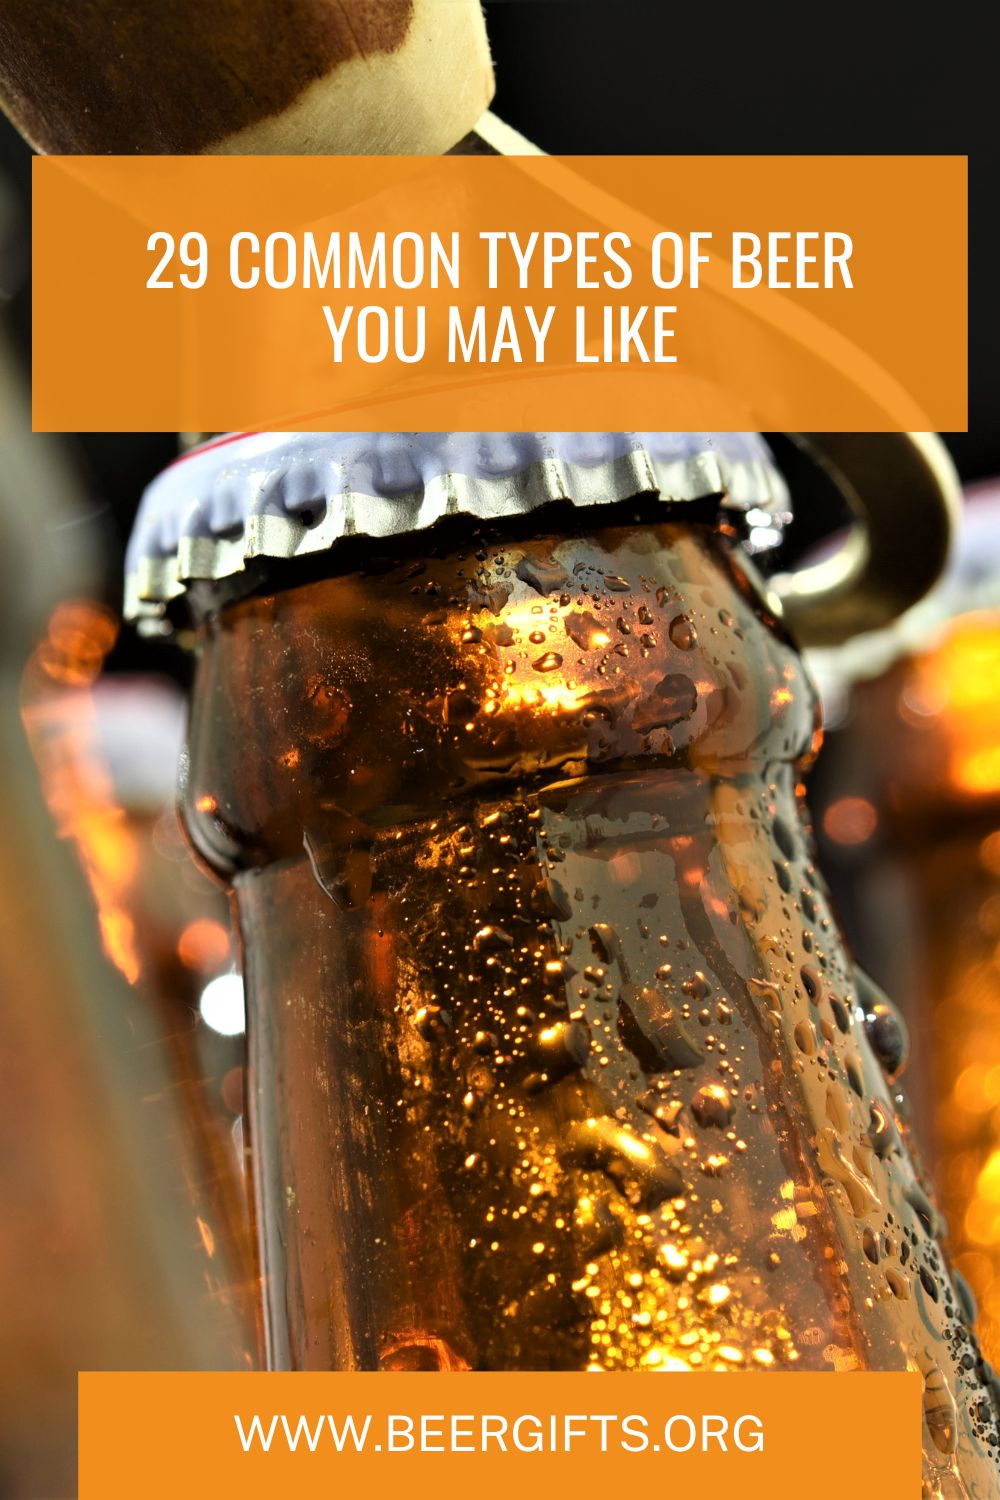 29 Common Types of Beer You May Like1